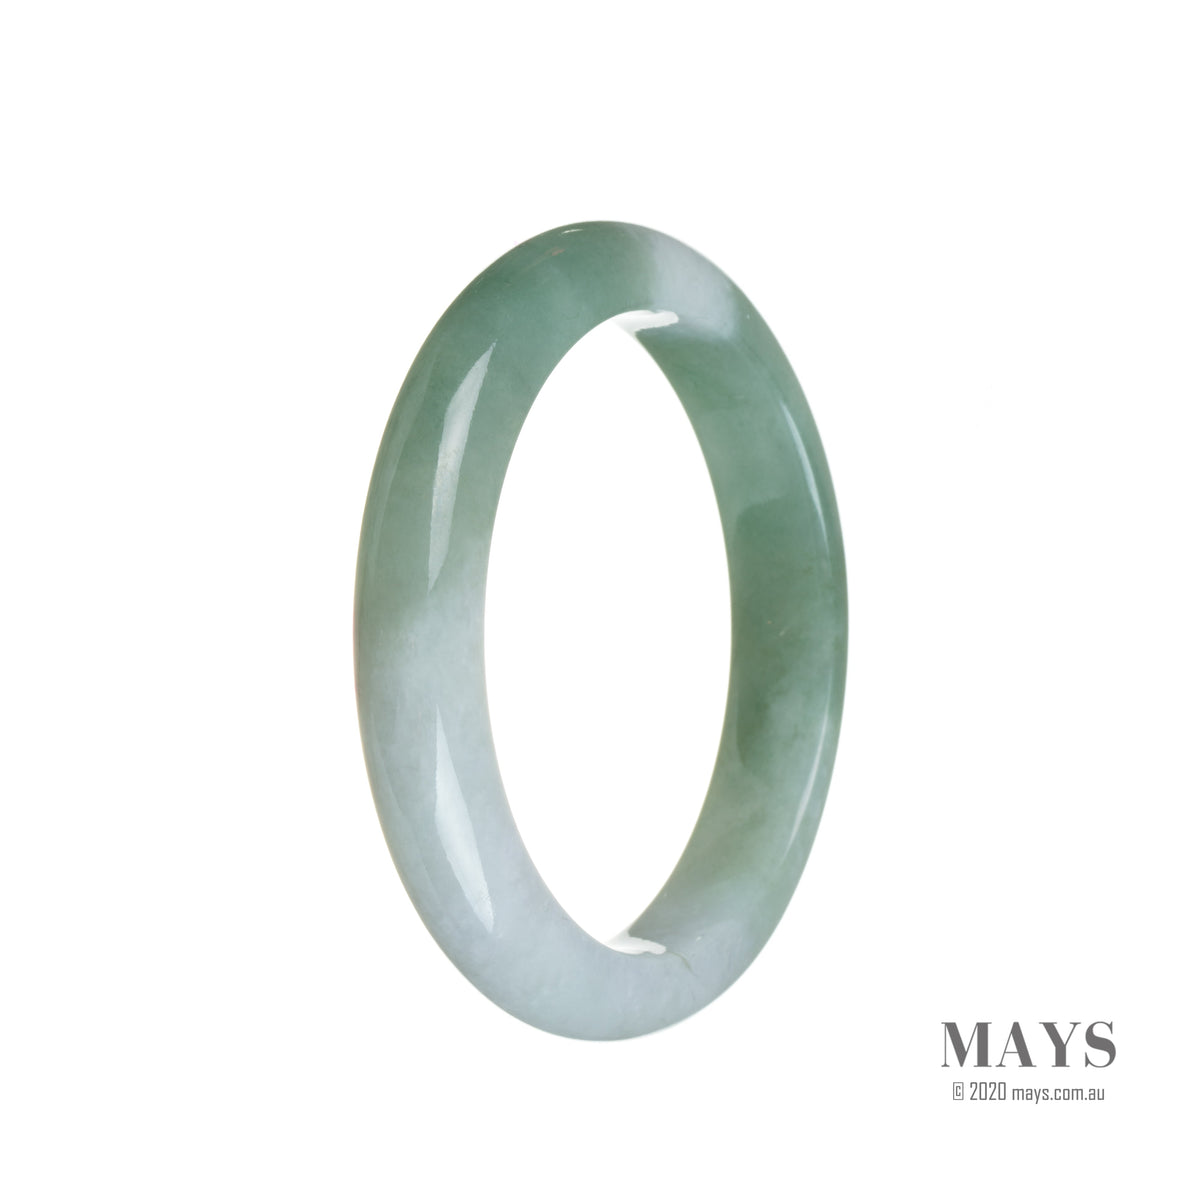 A pale lavender and green-spotted Jadeite Jade bangle with a half moon shape, measuring 53mm.